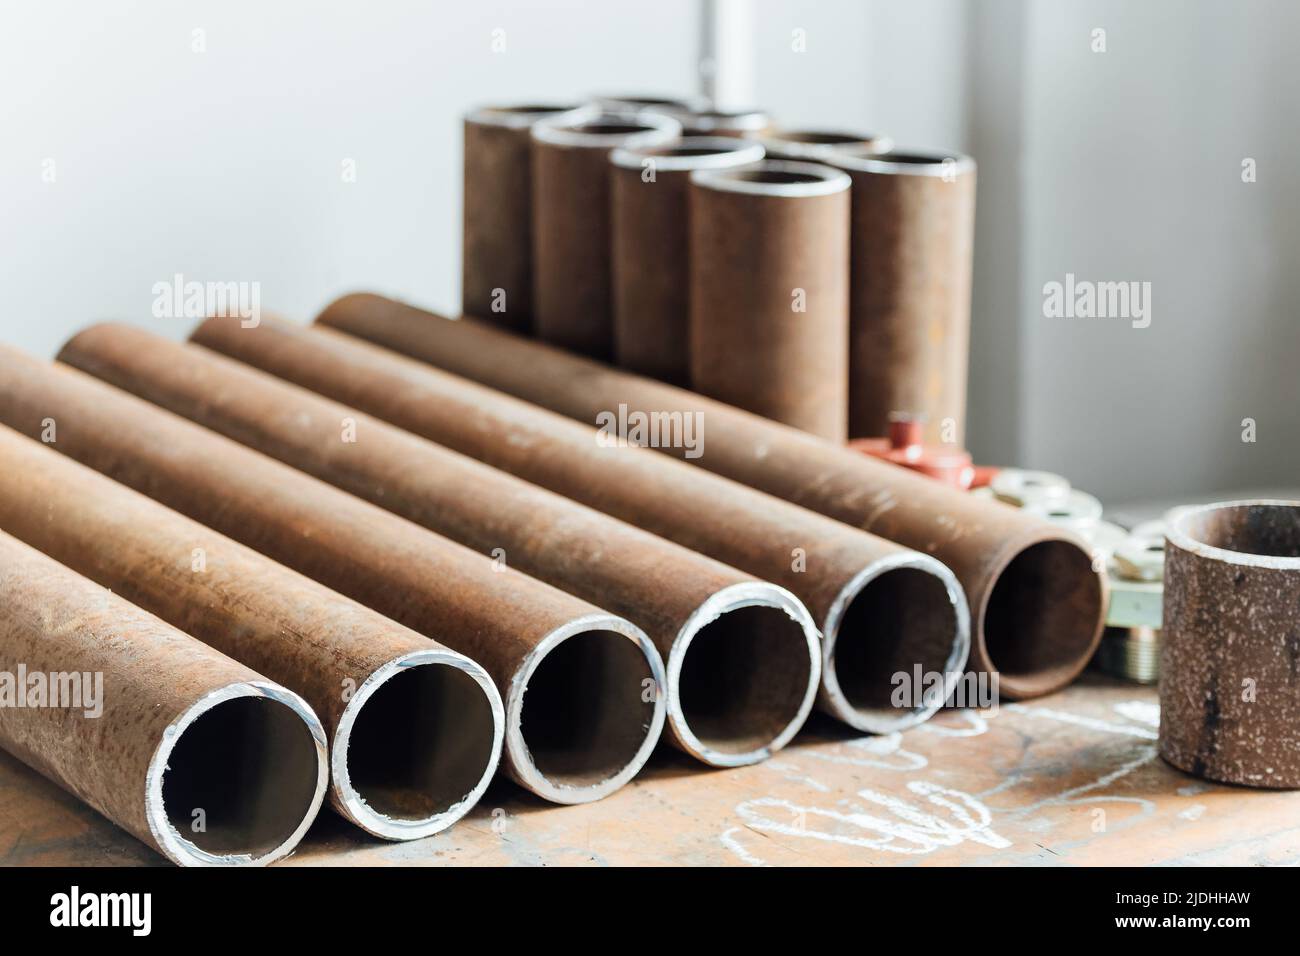 Round metal pipes of same diameter lie in row on workbench in industrial workshop. Manufacture and production of metal products. Industrial background. Stock Photo